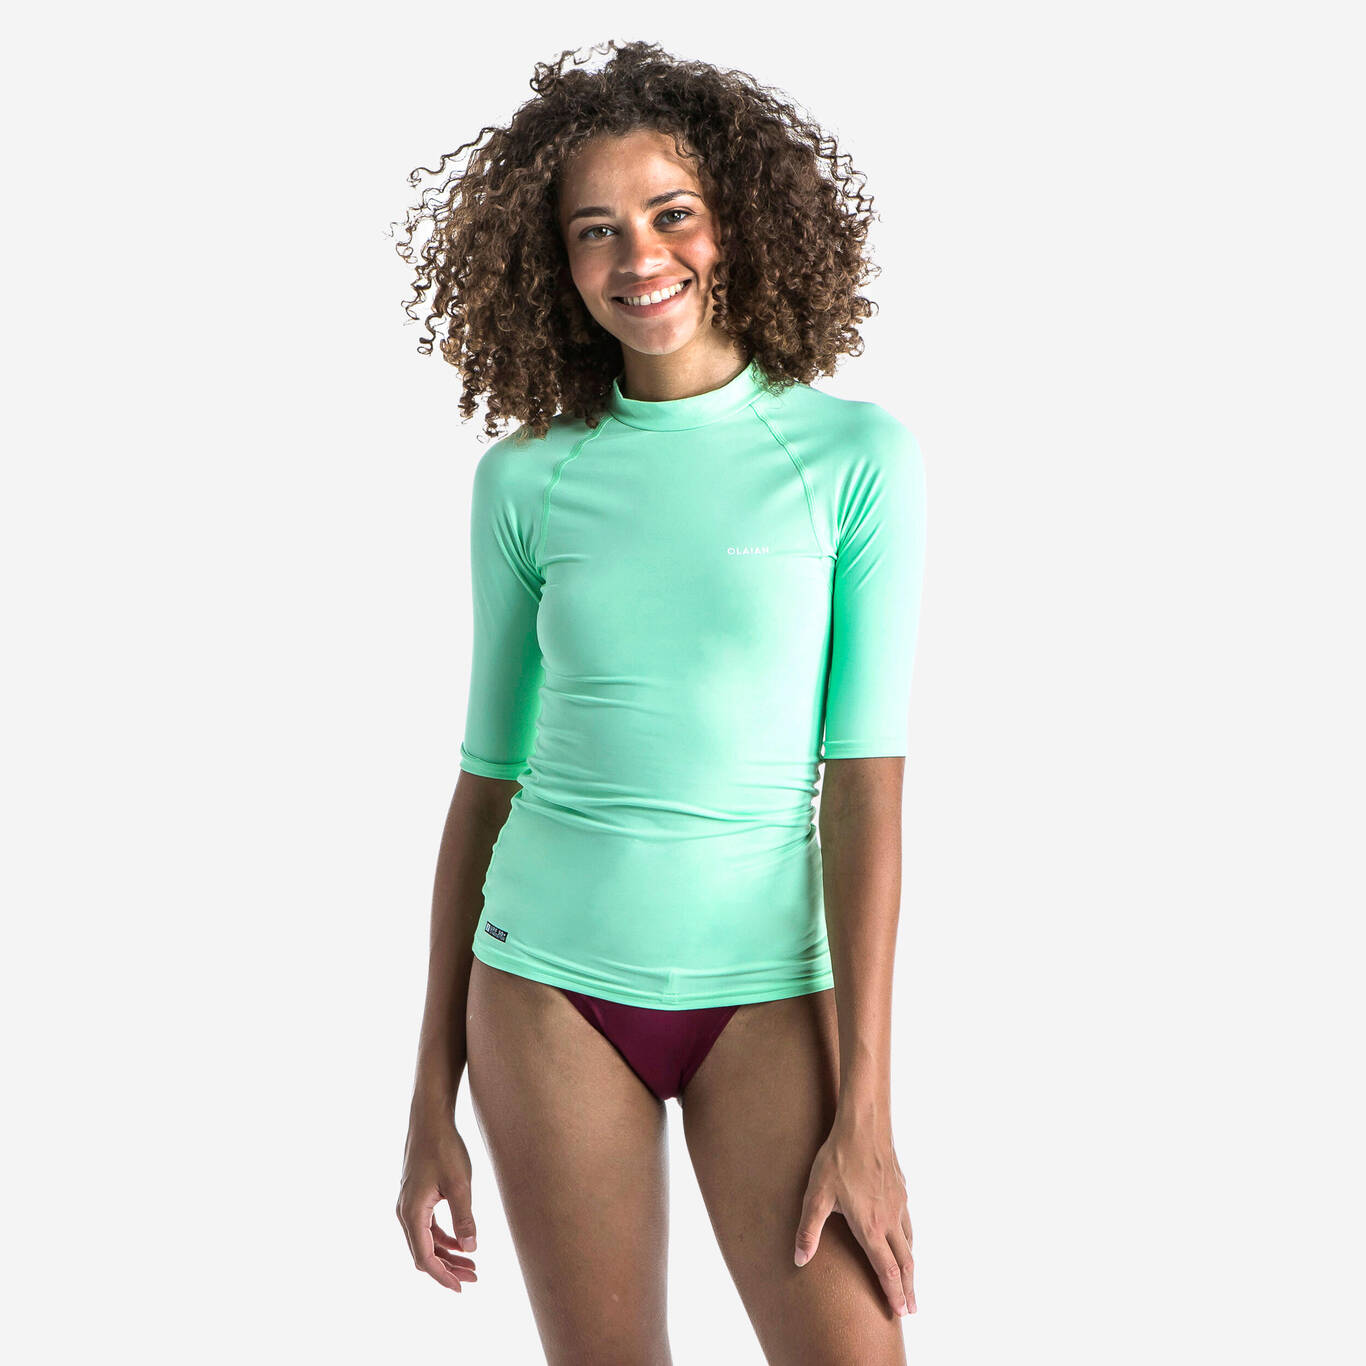 Anti-UV top with no colouring, designed using green plastic bottles